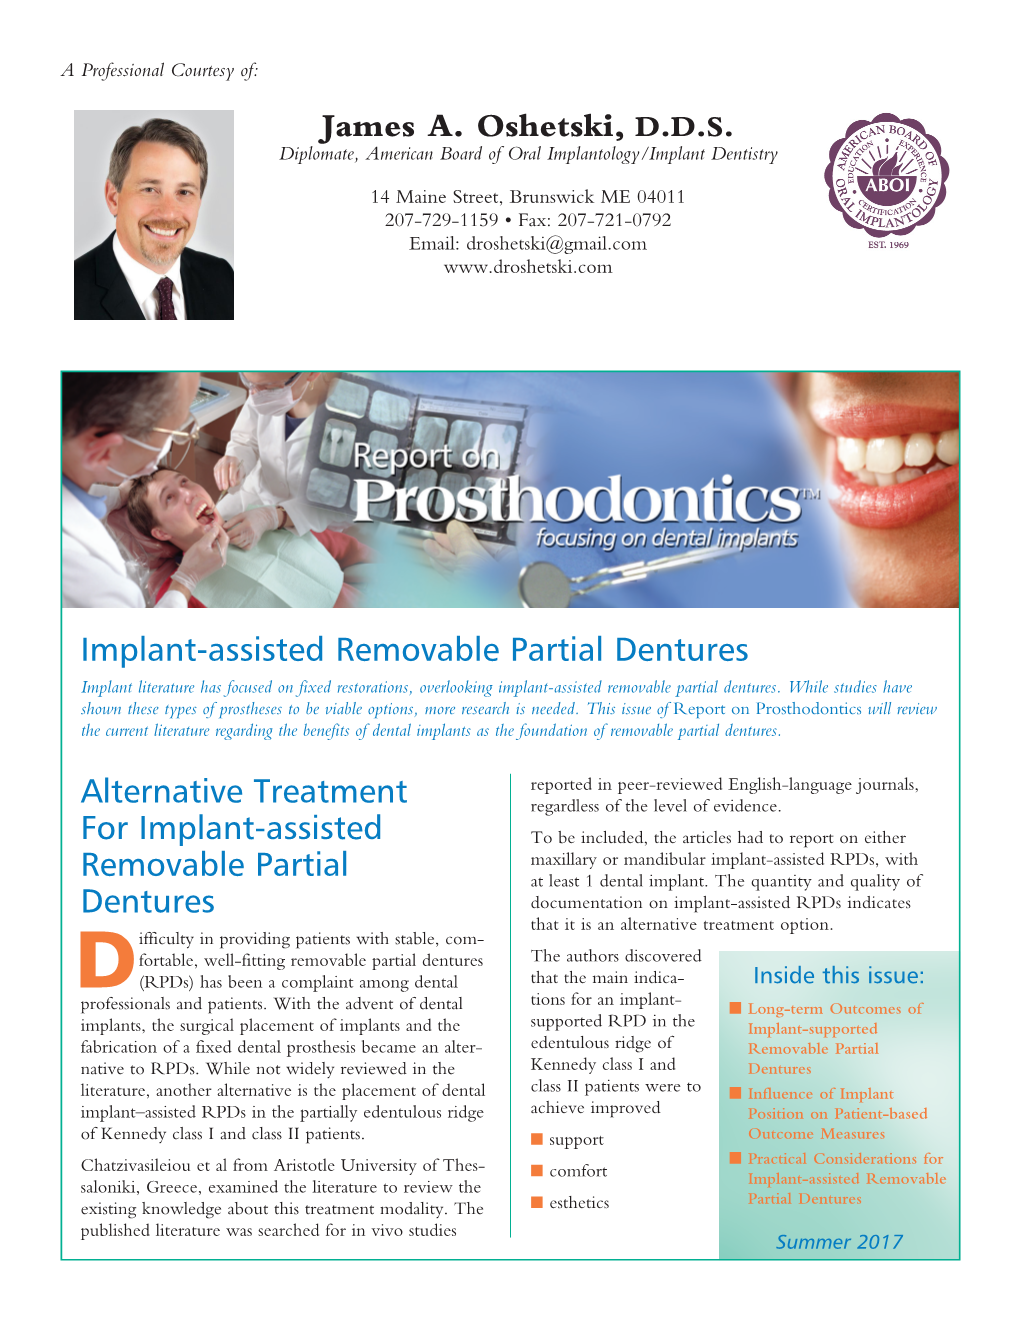 Alternative Treatment for Implant-Assisted Removable Partial